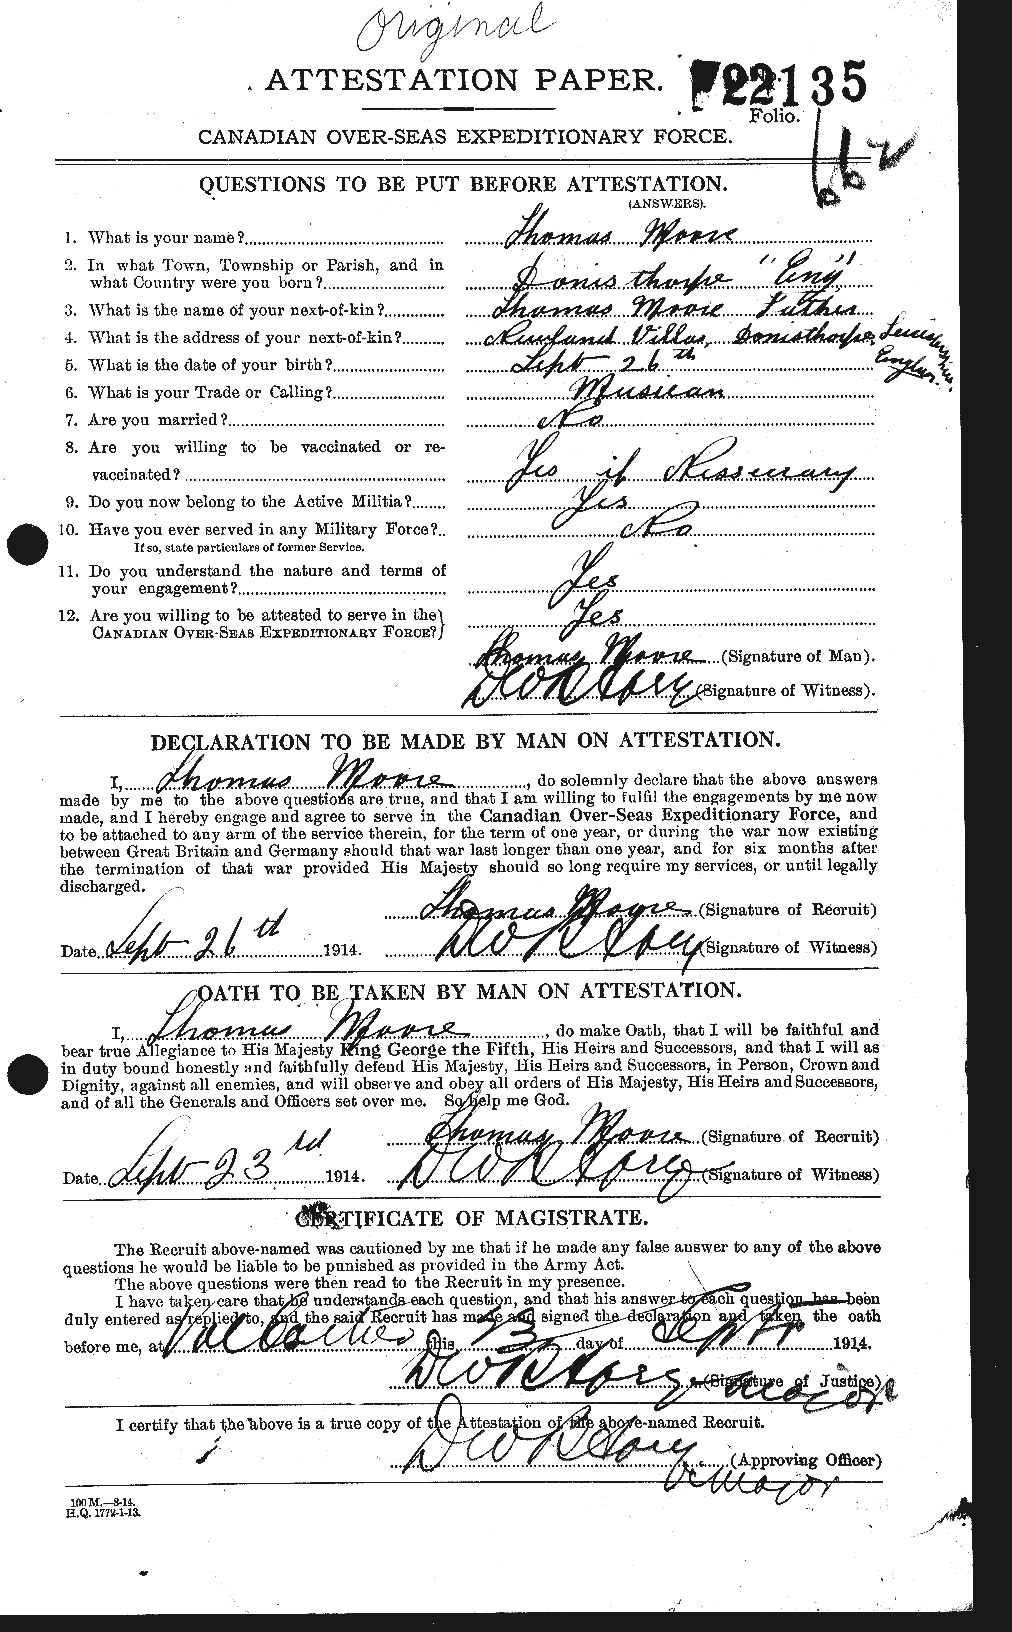 Personnel Records of the First World War - CEF 505622a